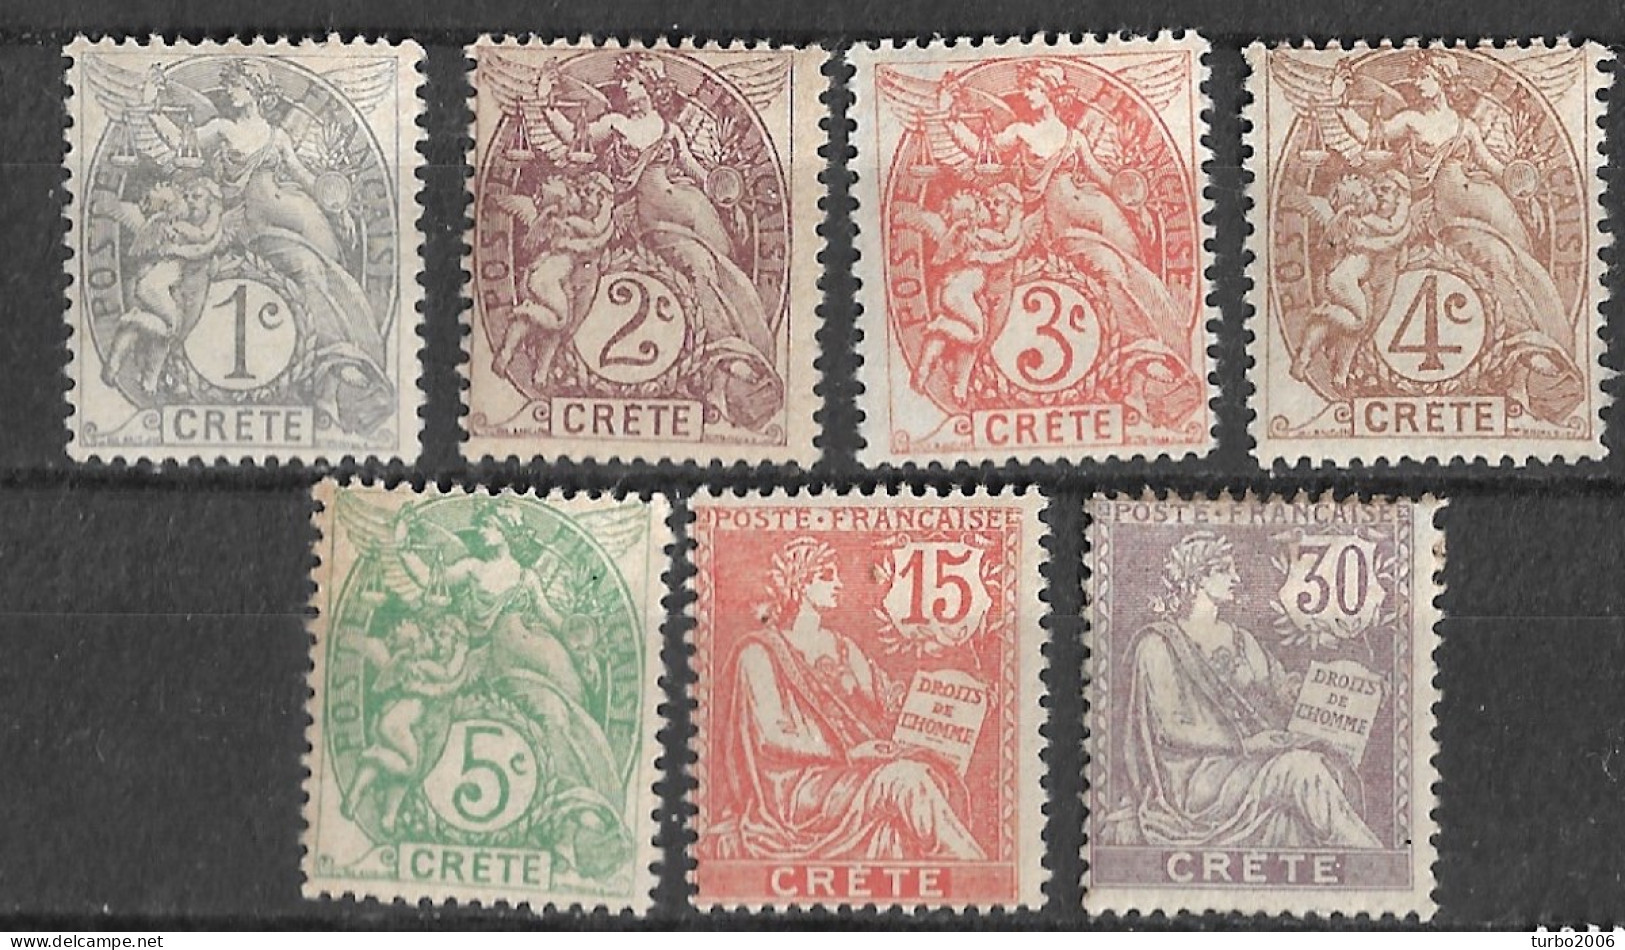 CRETE 1902 French Office : Stamps Of 1900 With Inscription CRETE 7 Values From The Set  Vl. 1 / 5 - 7 - 10 MH - Kreta